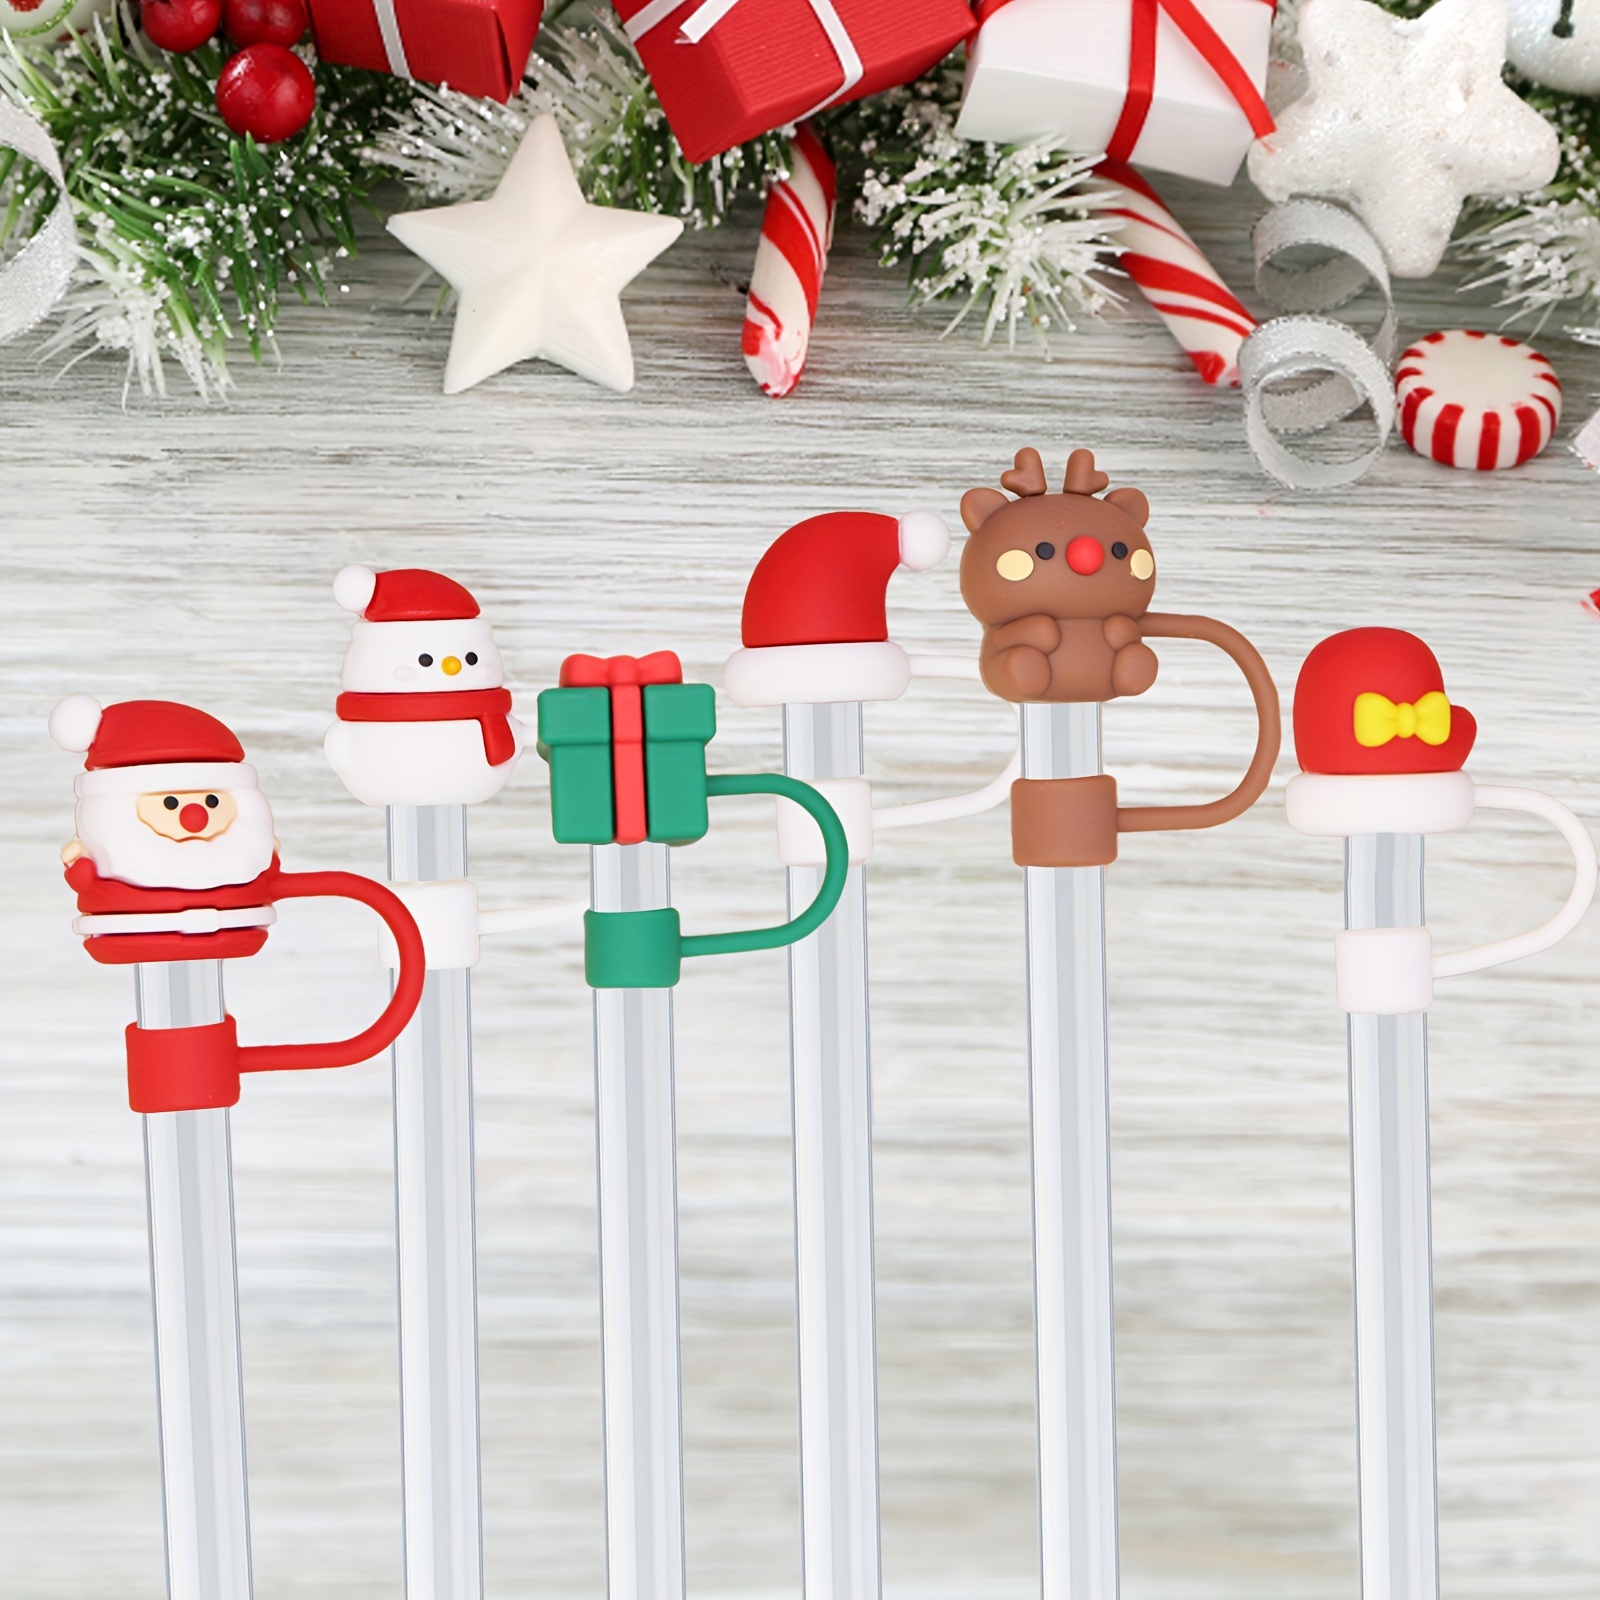 Christmas Straw Cover Caps, 6 PCS Christmas Theme Straw Cover for Stanley  30&40 Oz Tumbler, Reusable Silicon Christmas Straw Toppers Cute Straw Caps